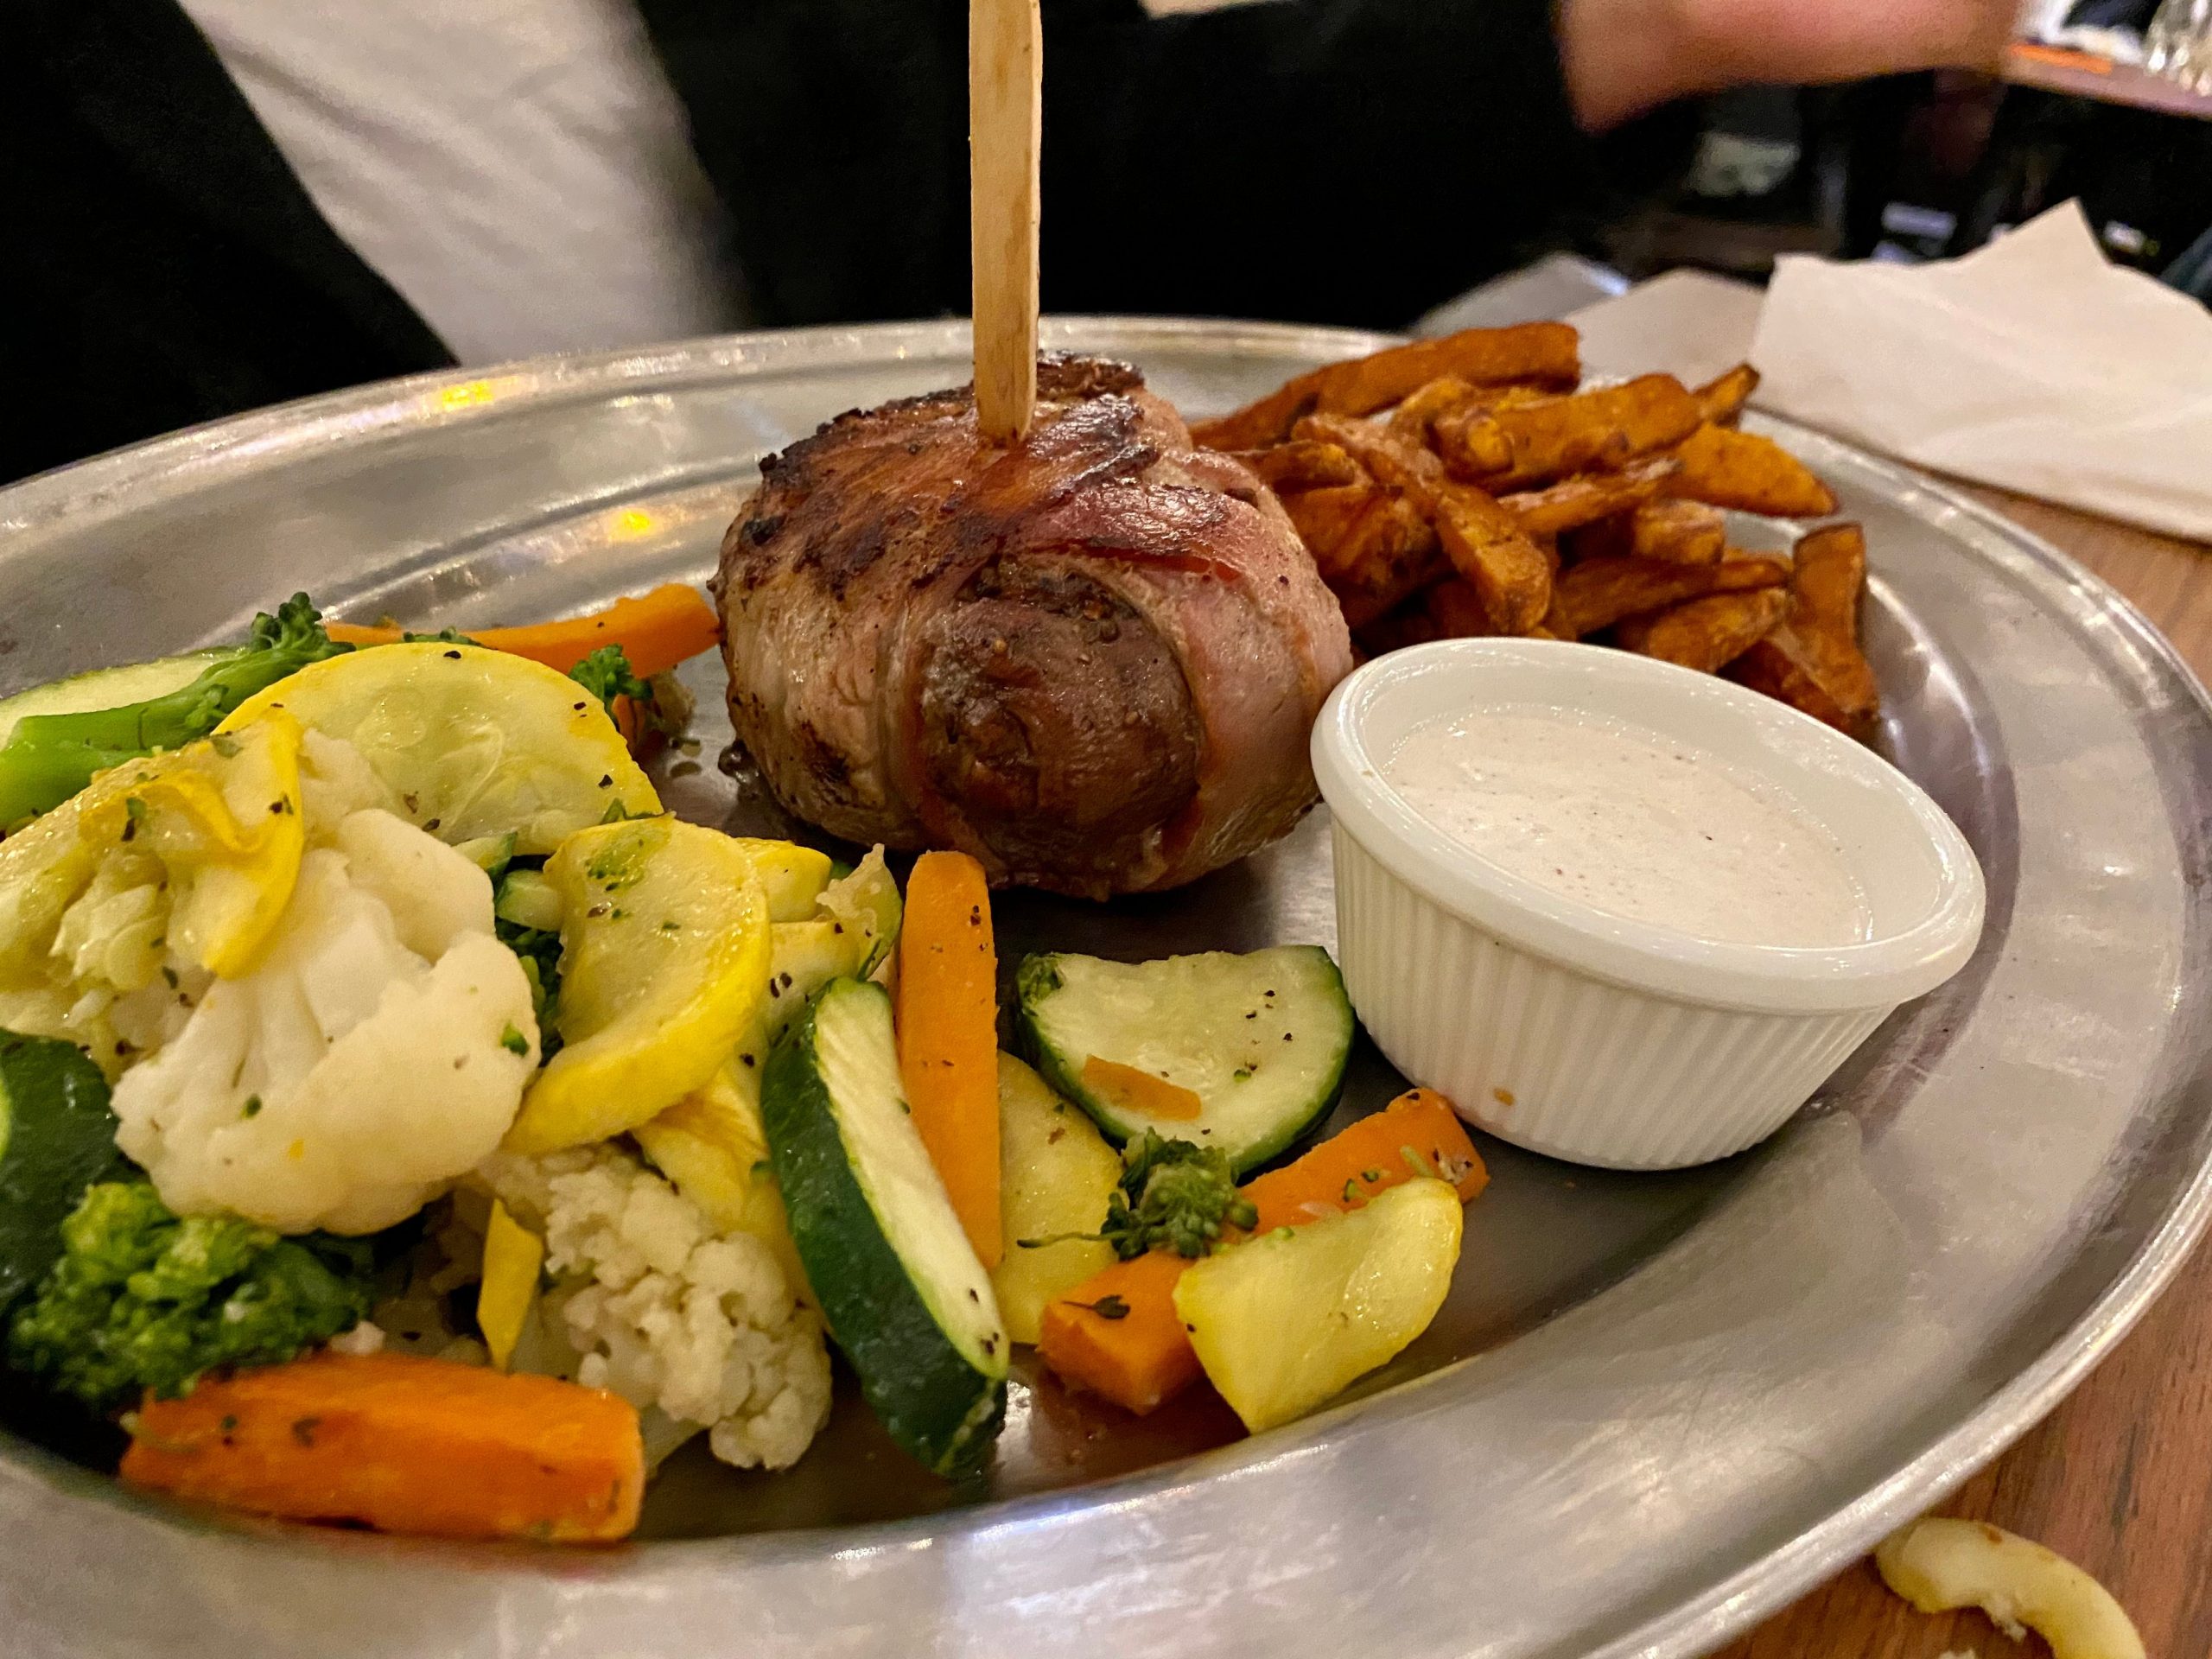 Bacon-wrapped filet mignon with mixed vegetables and sweet potato fries